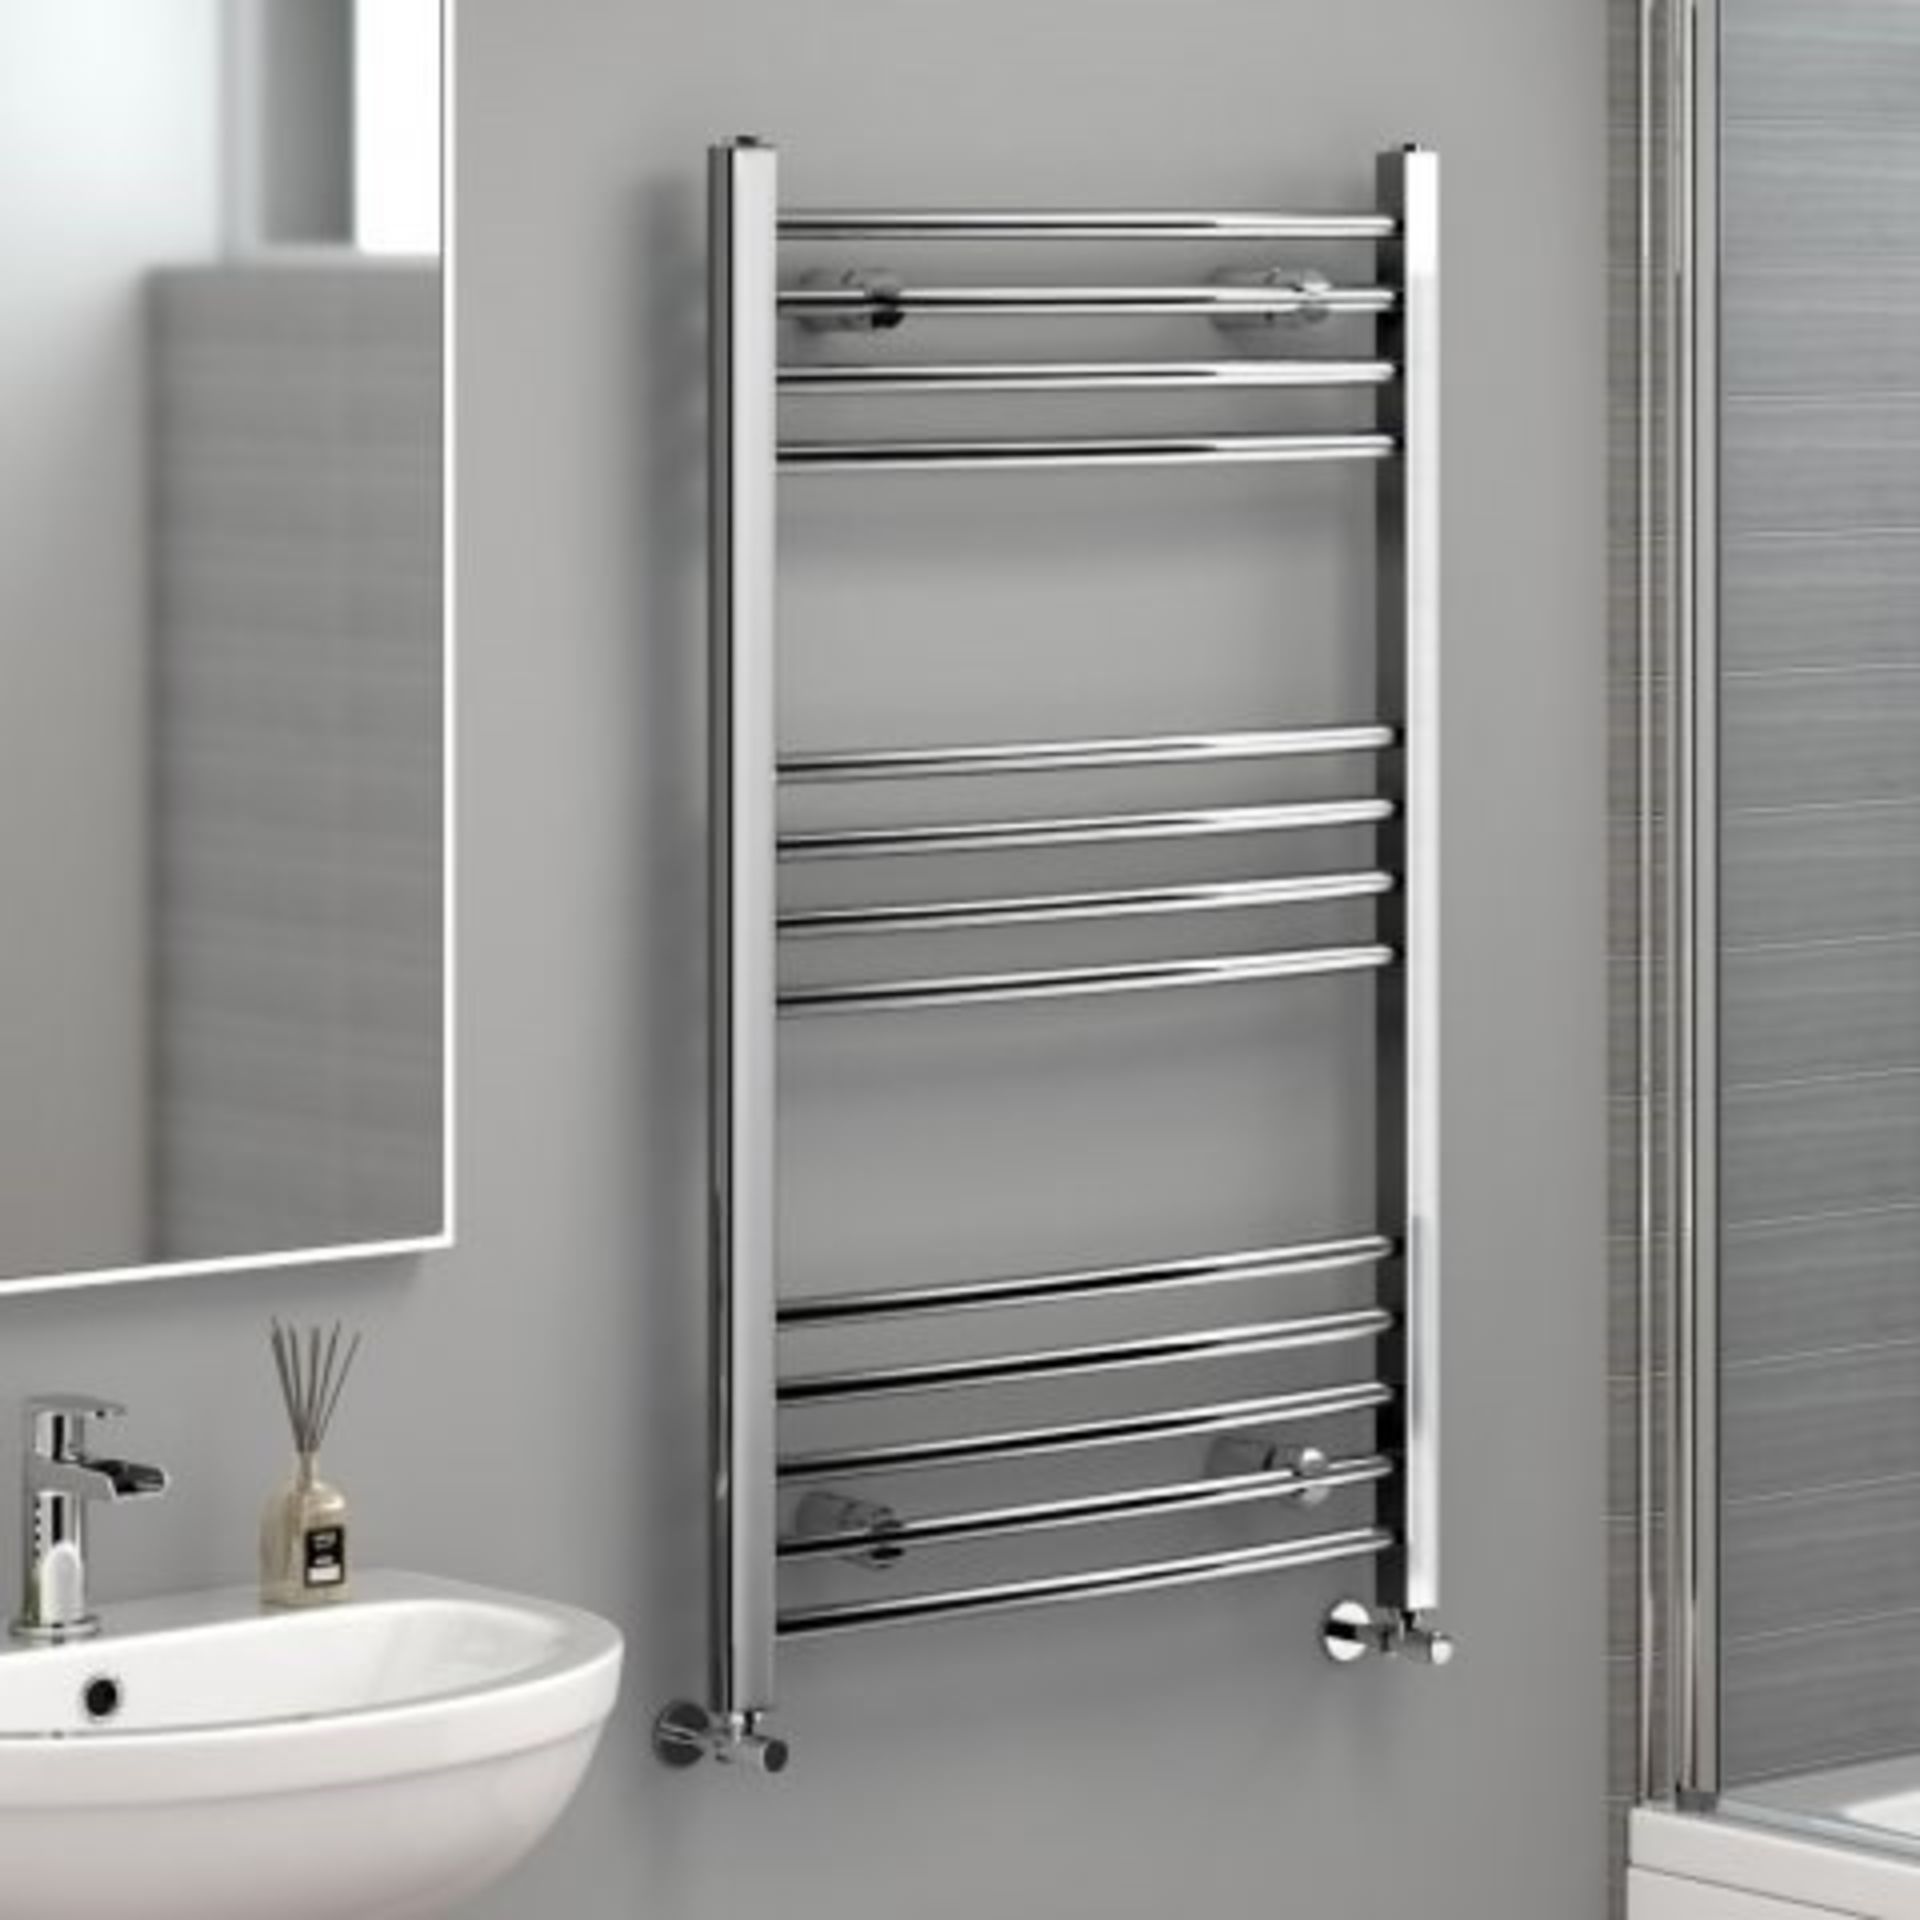 New 1200x500mm - 20mm Tubes - RRP £219.99.Chrome Curved Rail Ladder Towel Radiator.Our Nancy